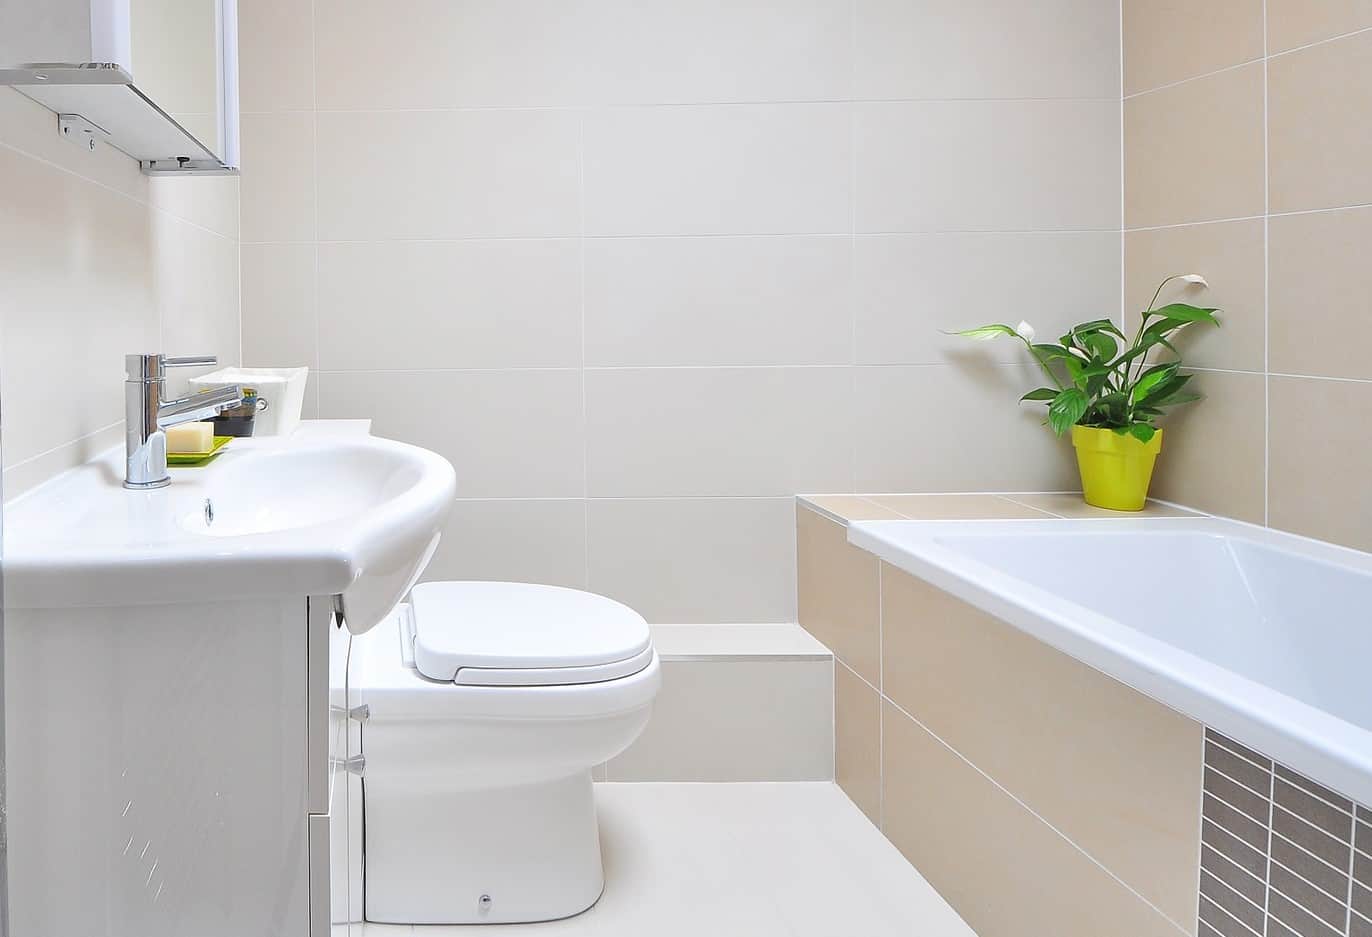 How to Clean a Toilet and Bidet: 8 Easy Steps to Follow